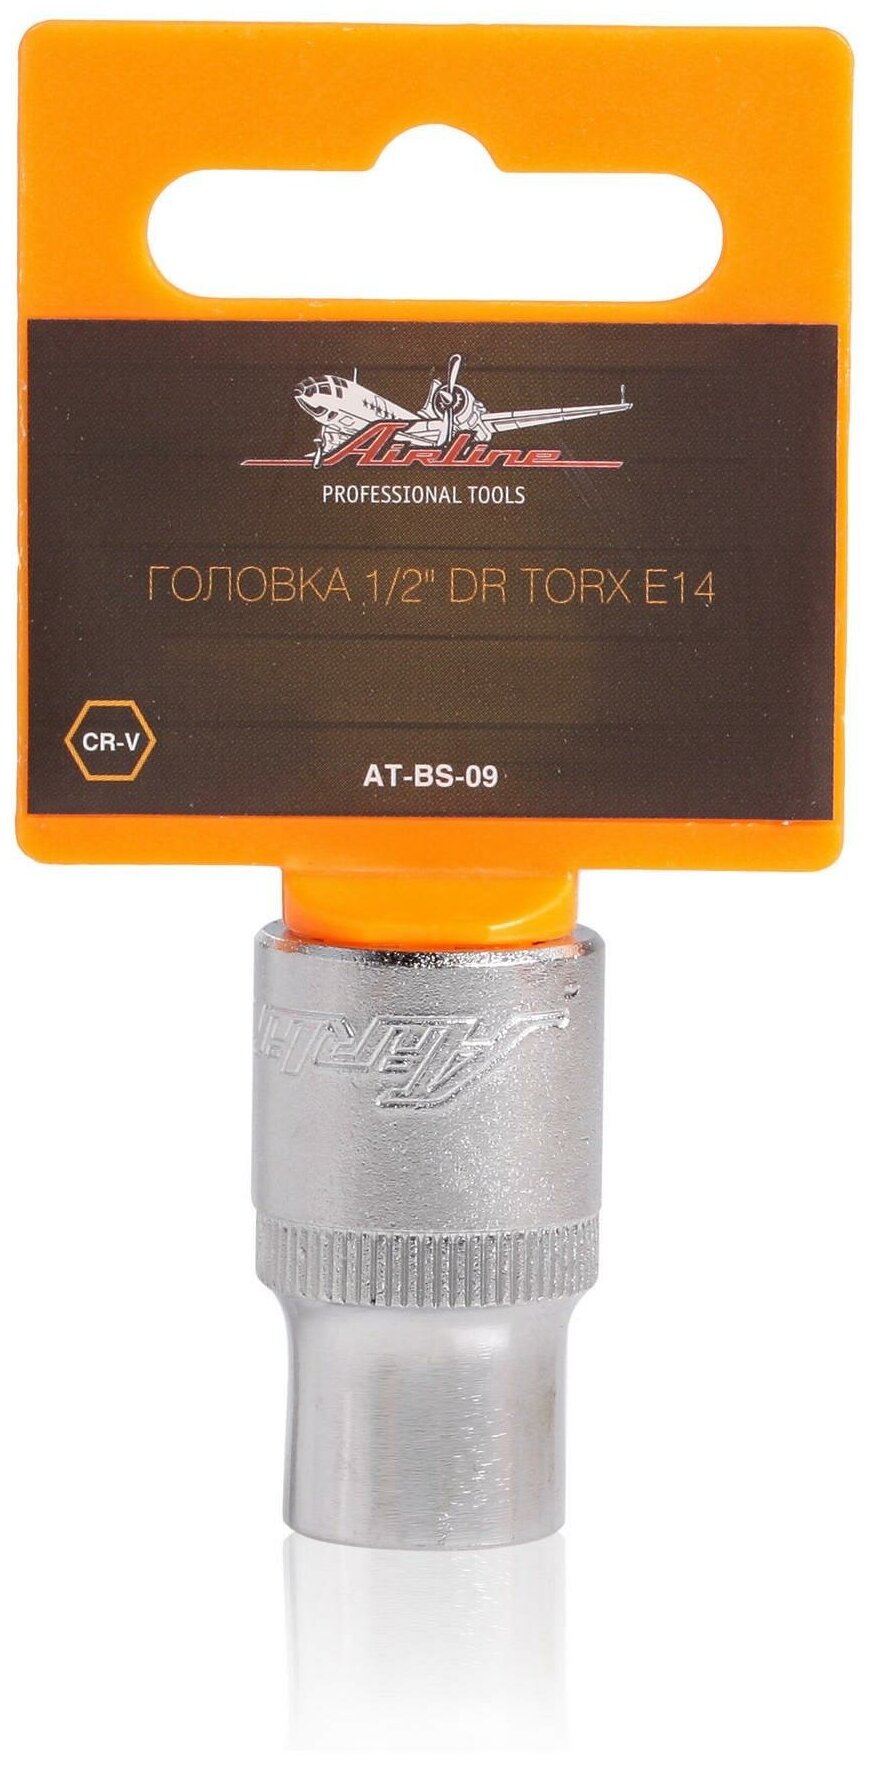 Головка 1/2" DR TORX E14 AT-BS-09 AIRLINE